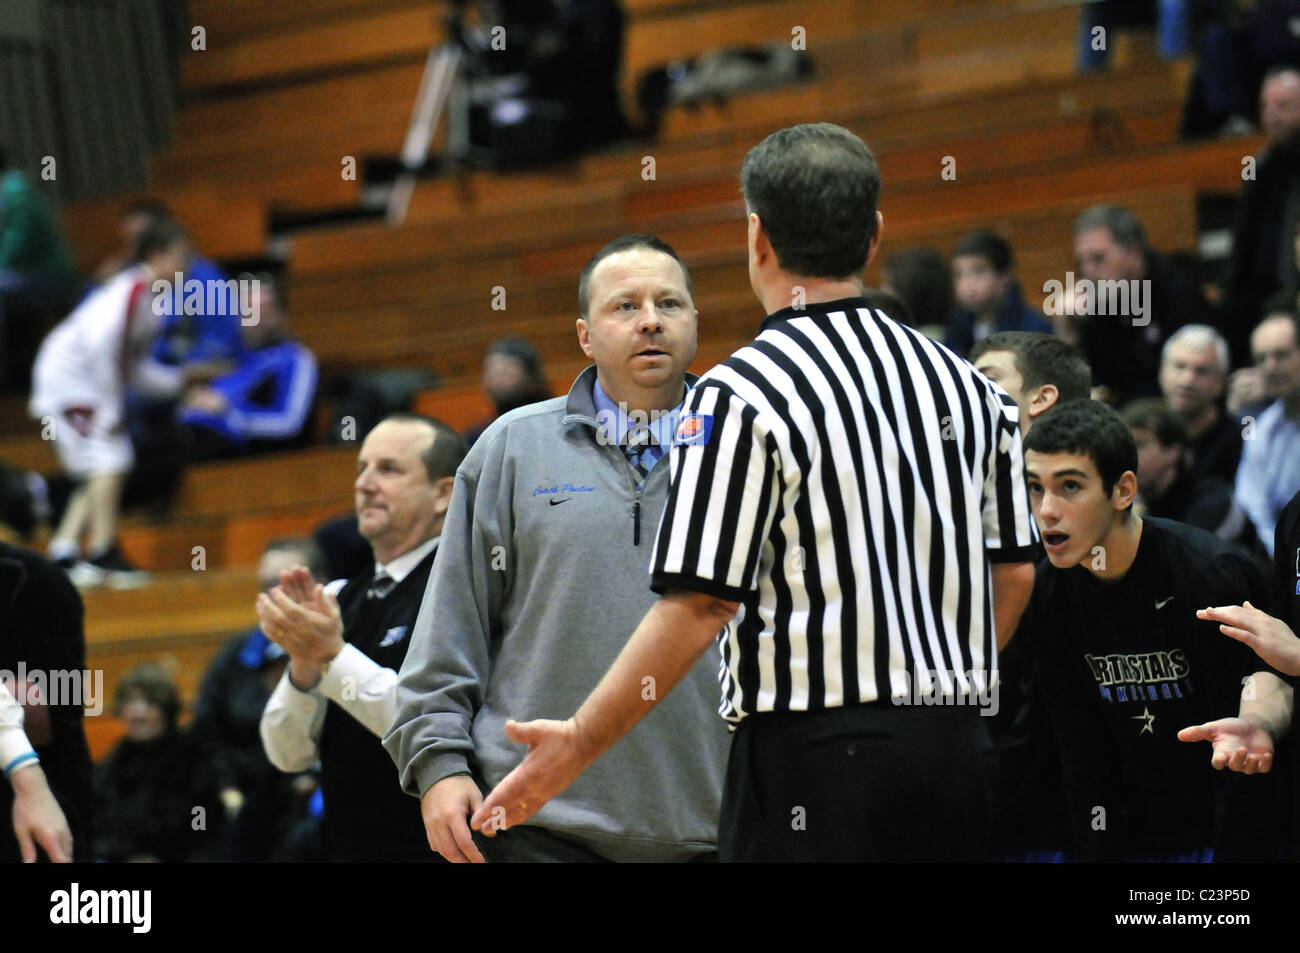 Coach questions an official about a call following a change of possession ruling during a high school basketball game. USA. Stock Photo